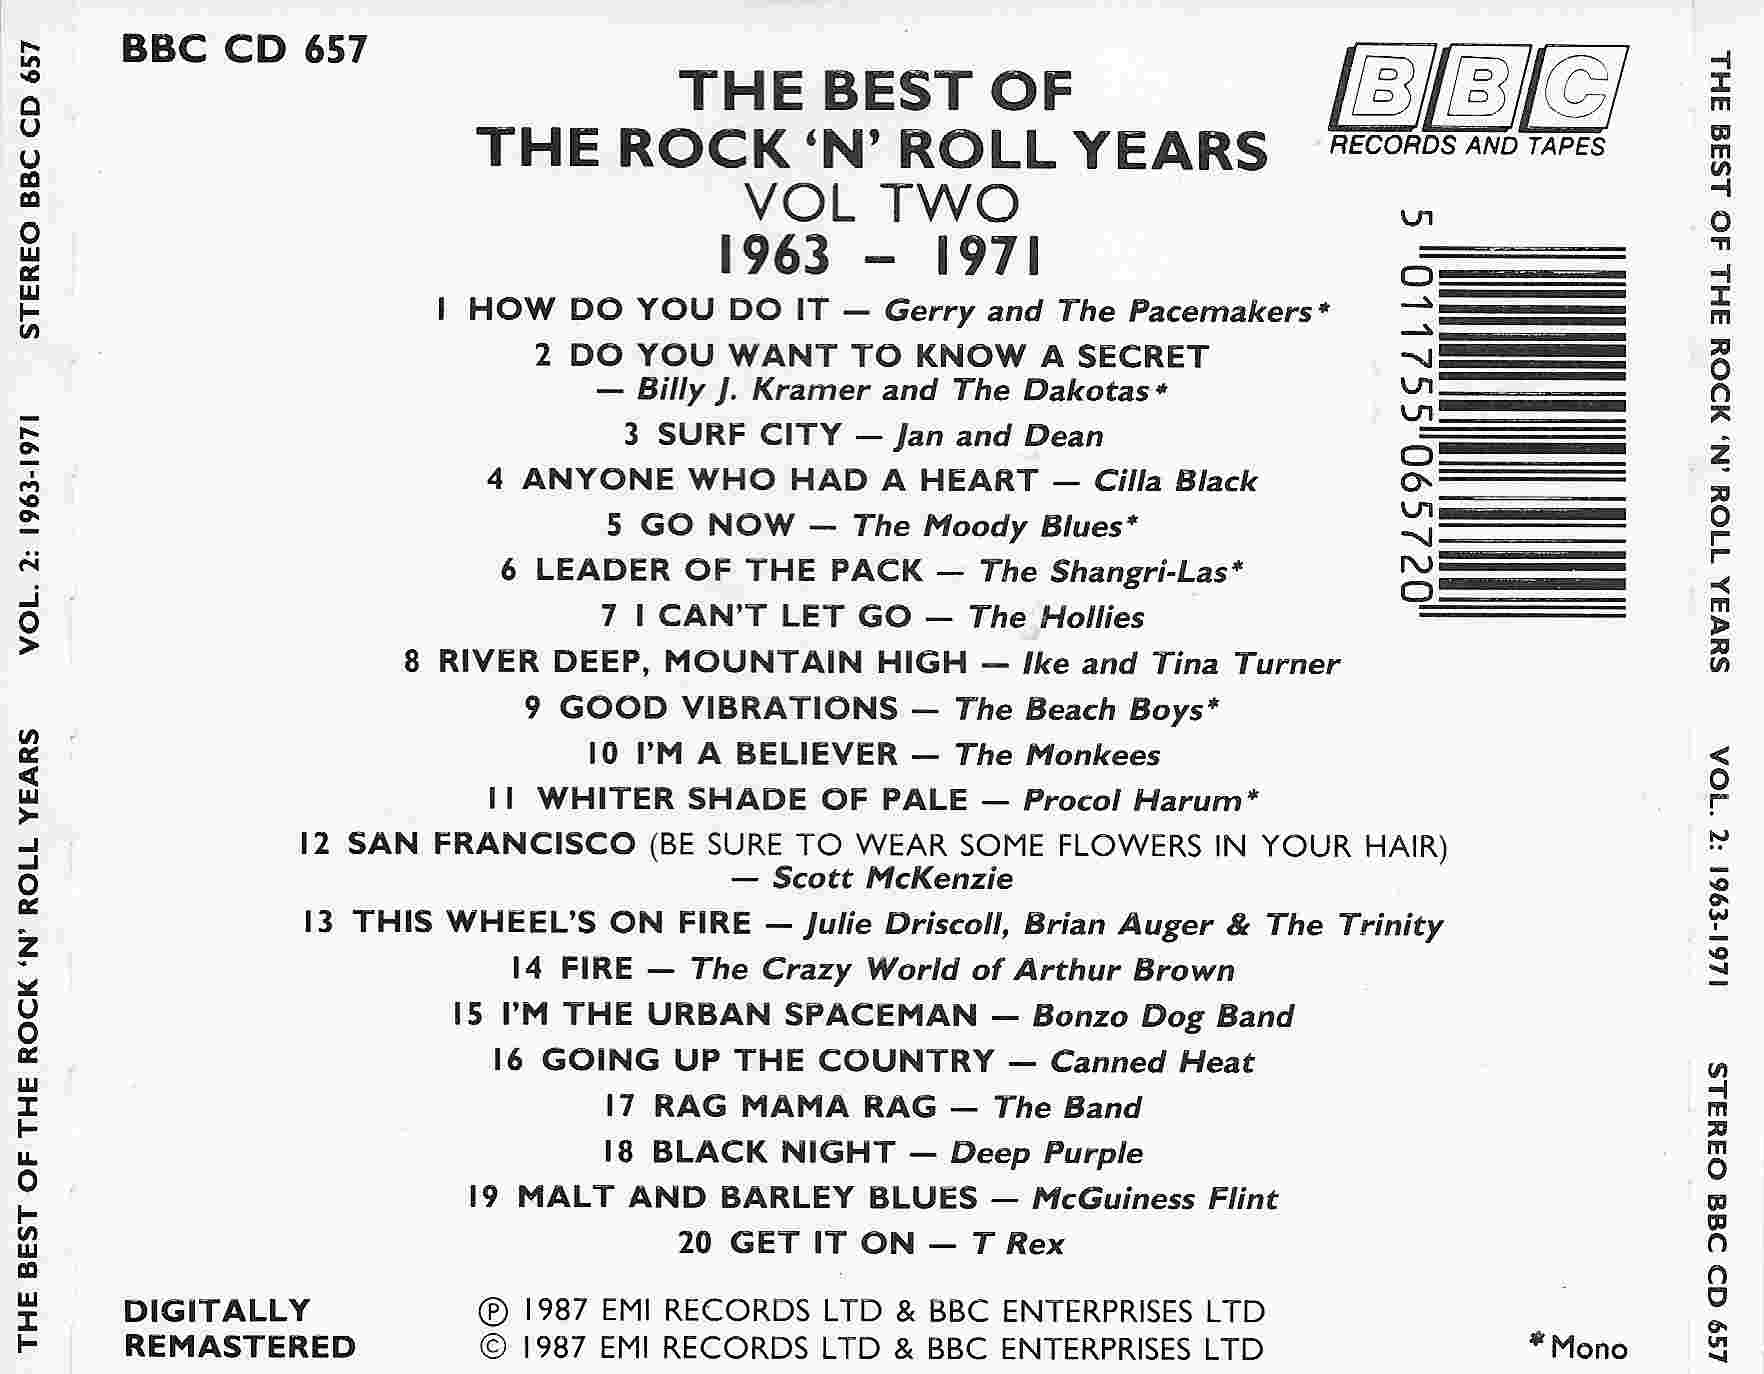 Picture of BBCCD657 The best of the rock 'n' roll years 1964 - 1971 by artist Various from the BBC records and Tapes library